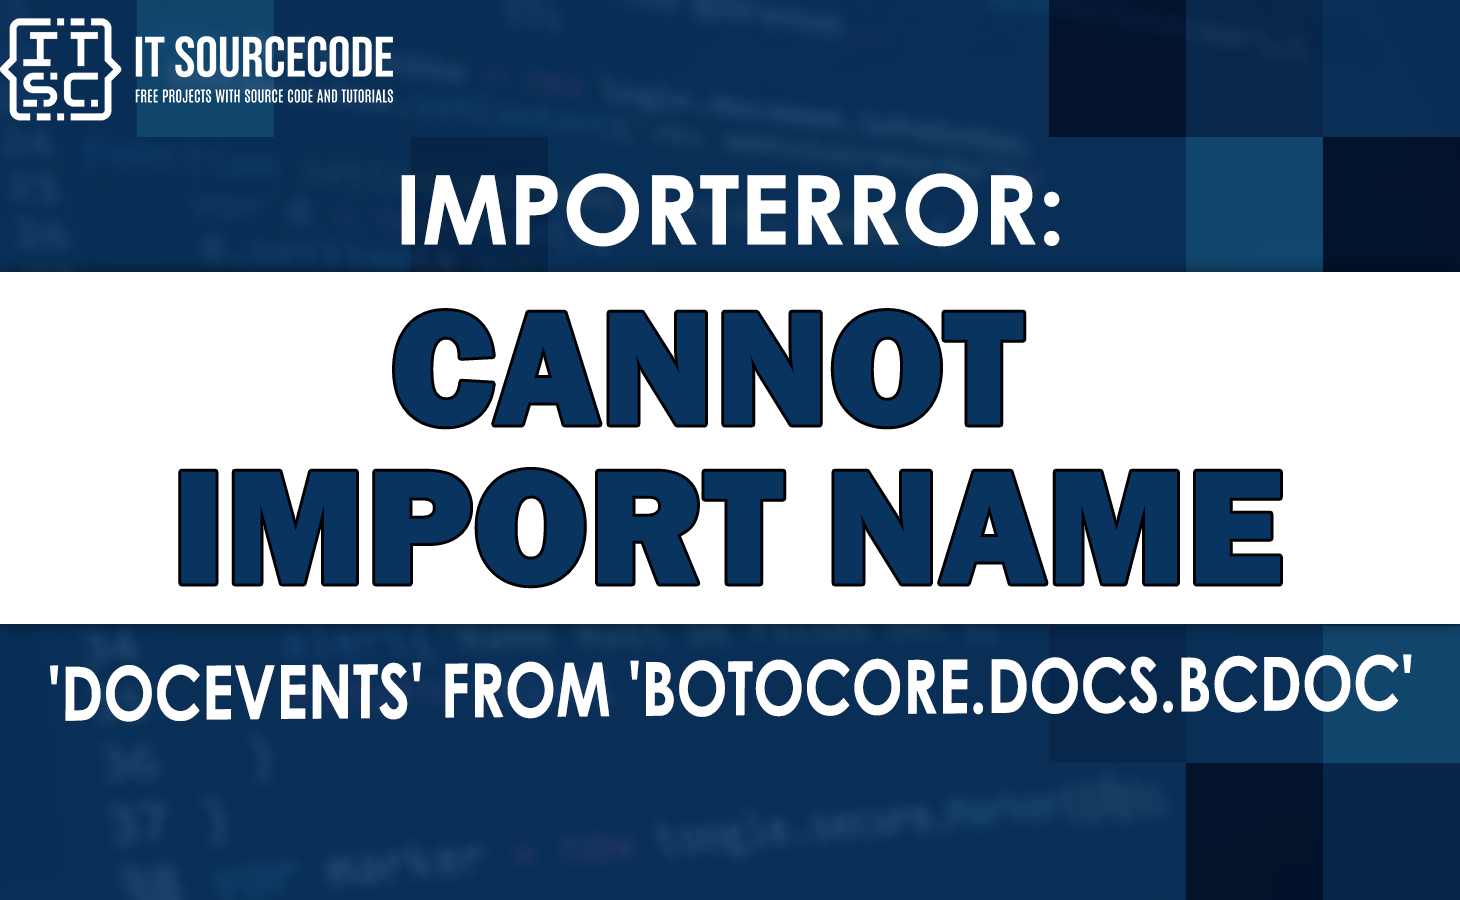 importerror cannot import name 'docevents' from 'botocore.docs.bcdoc'